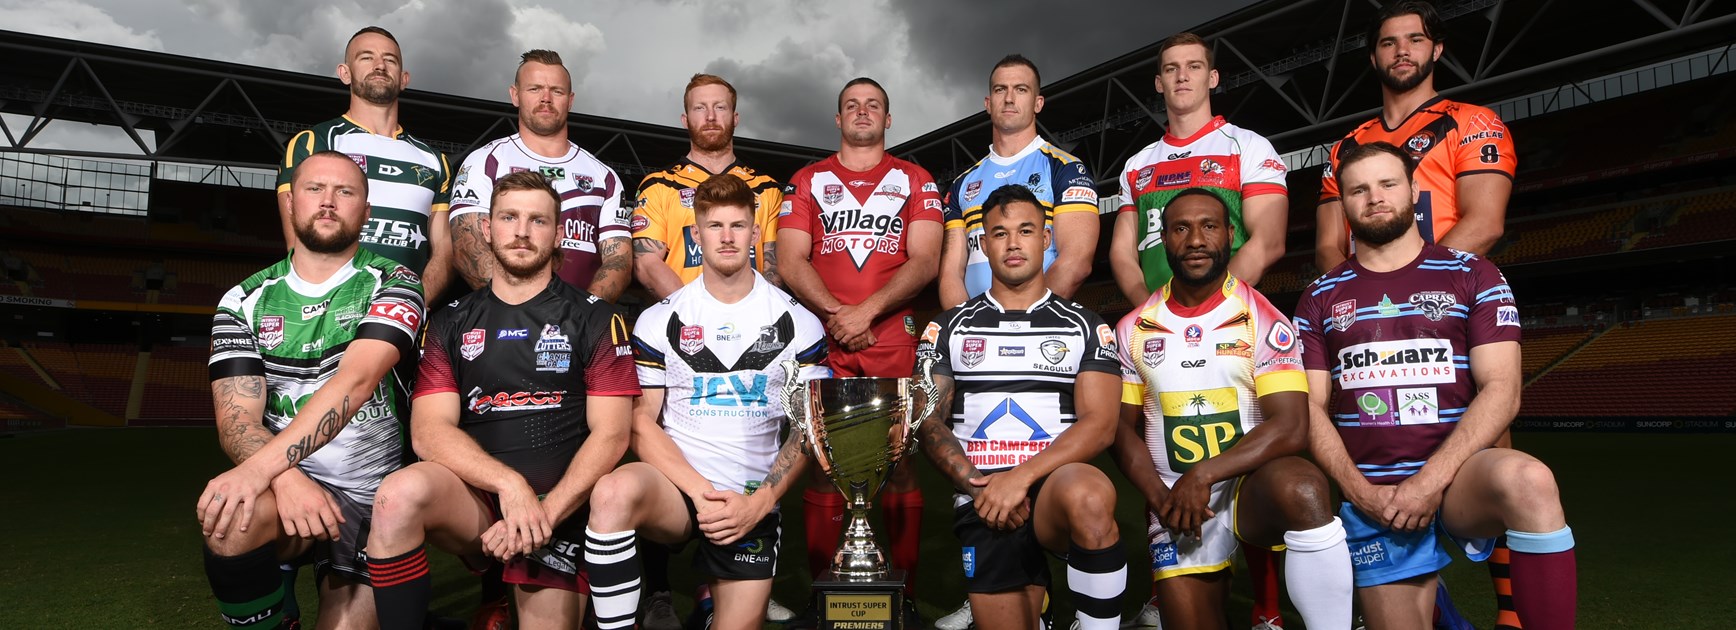 Excitement builds for Round 1 following season launch